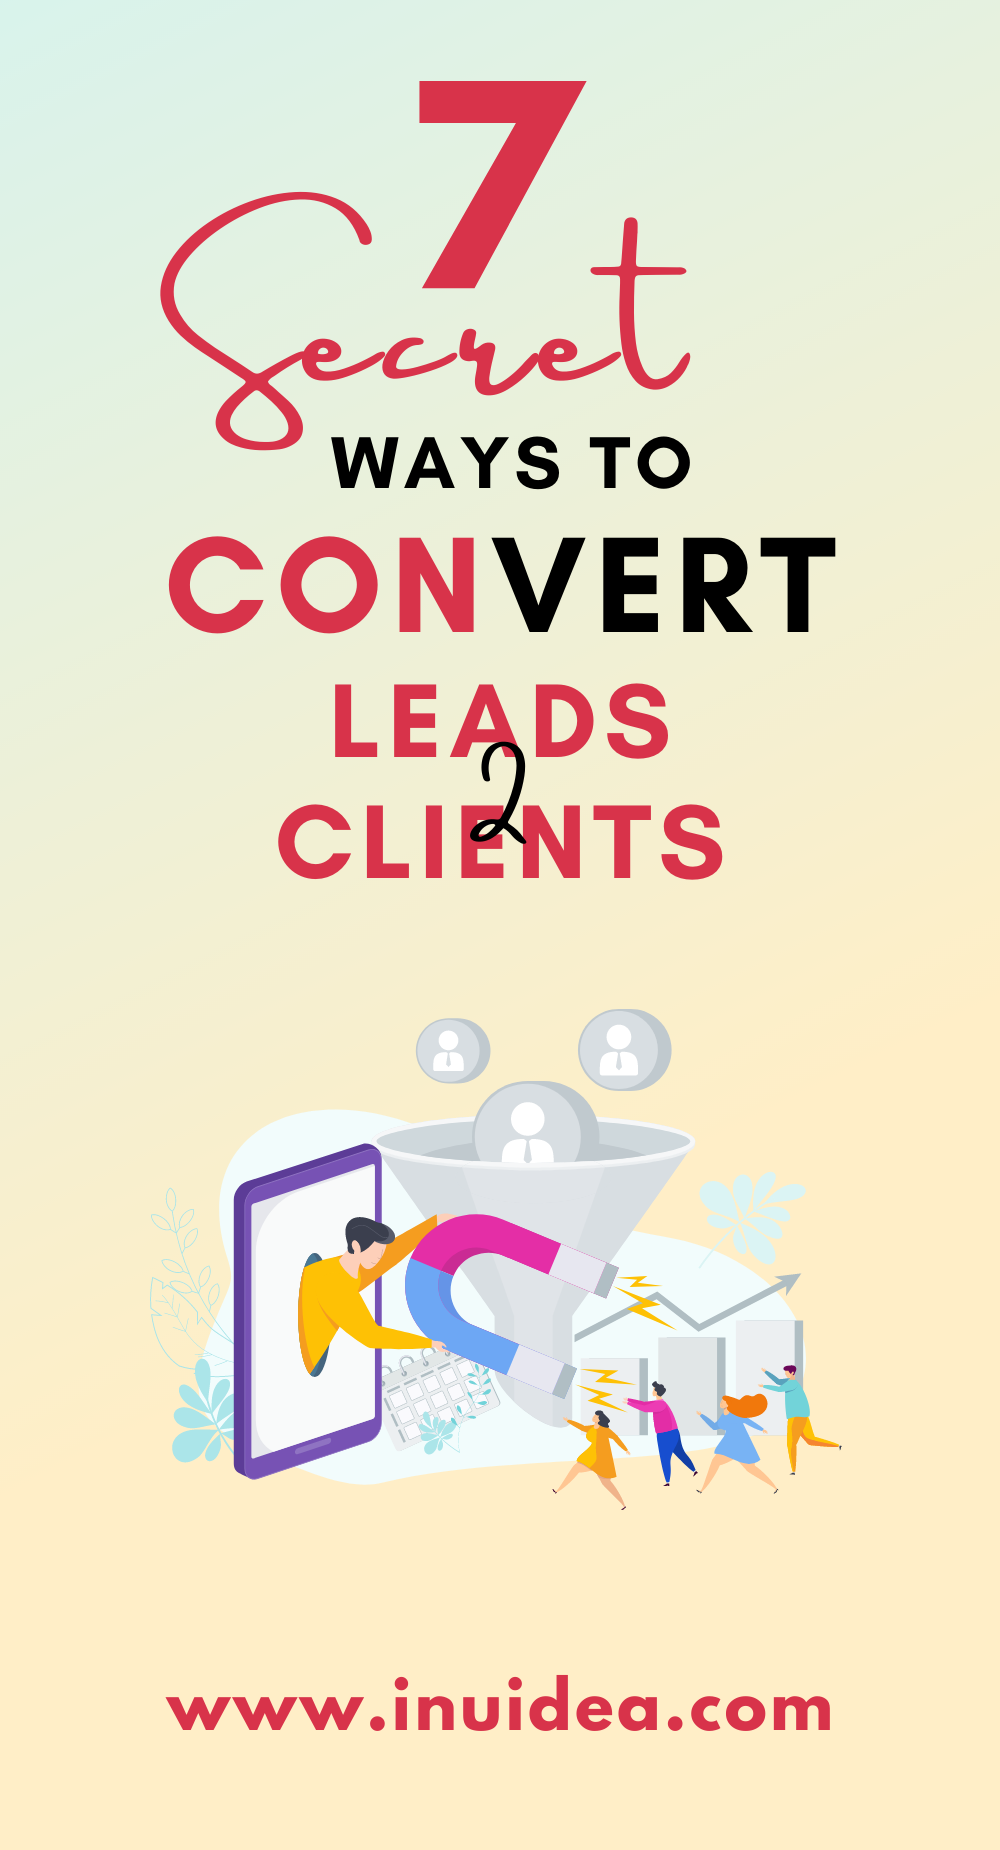 Convert leads to clients